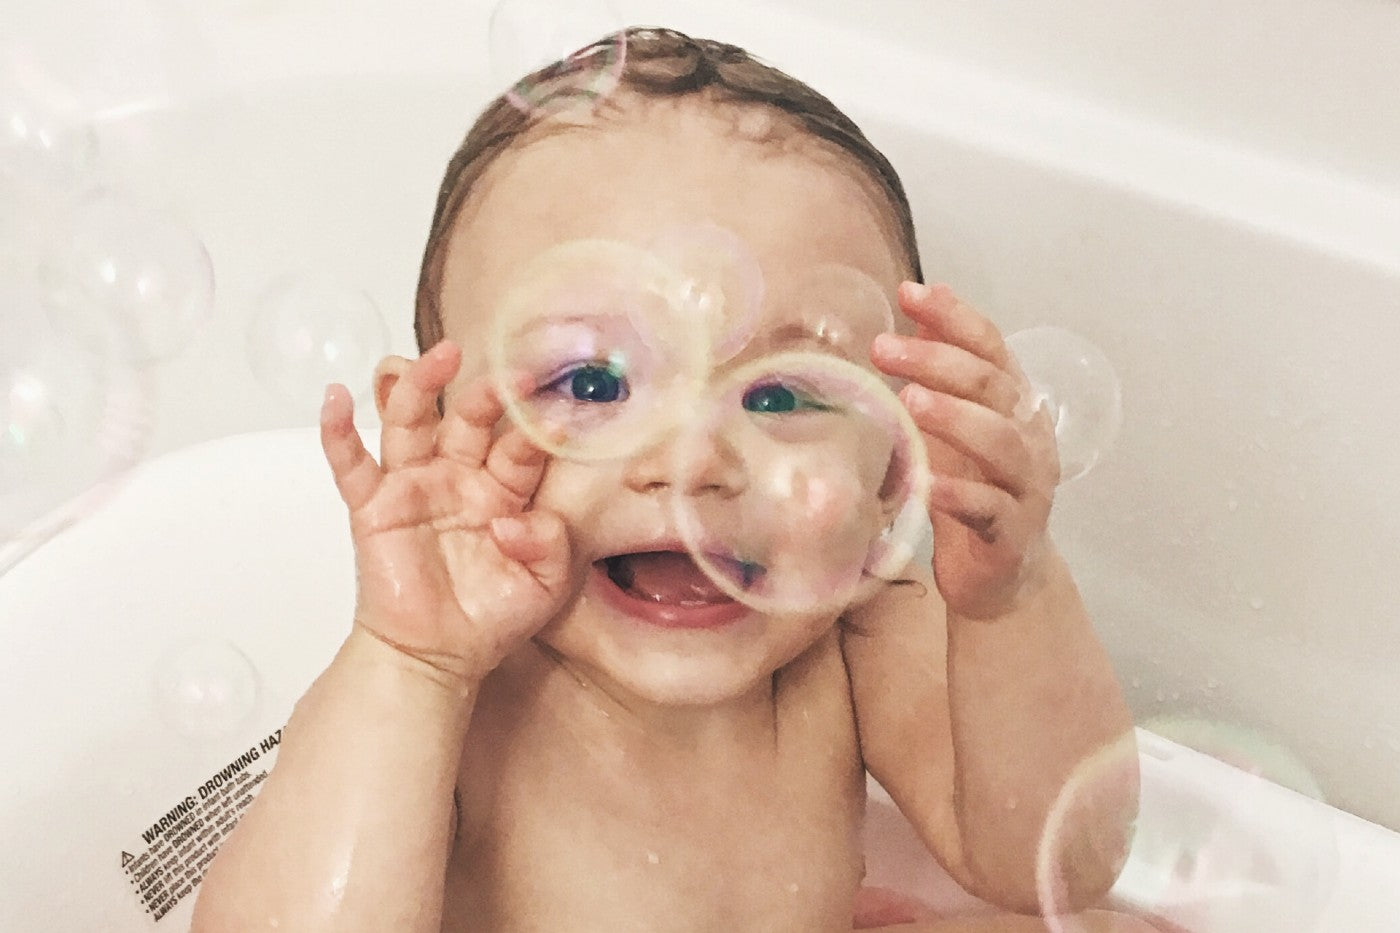 12 Ways to Make Bath Time Benefit Your Baby's Development